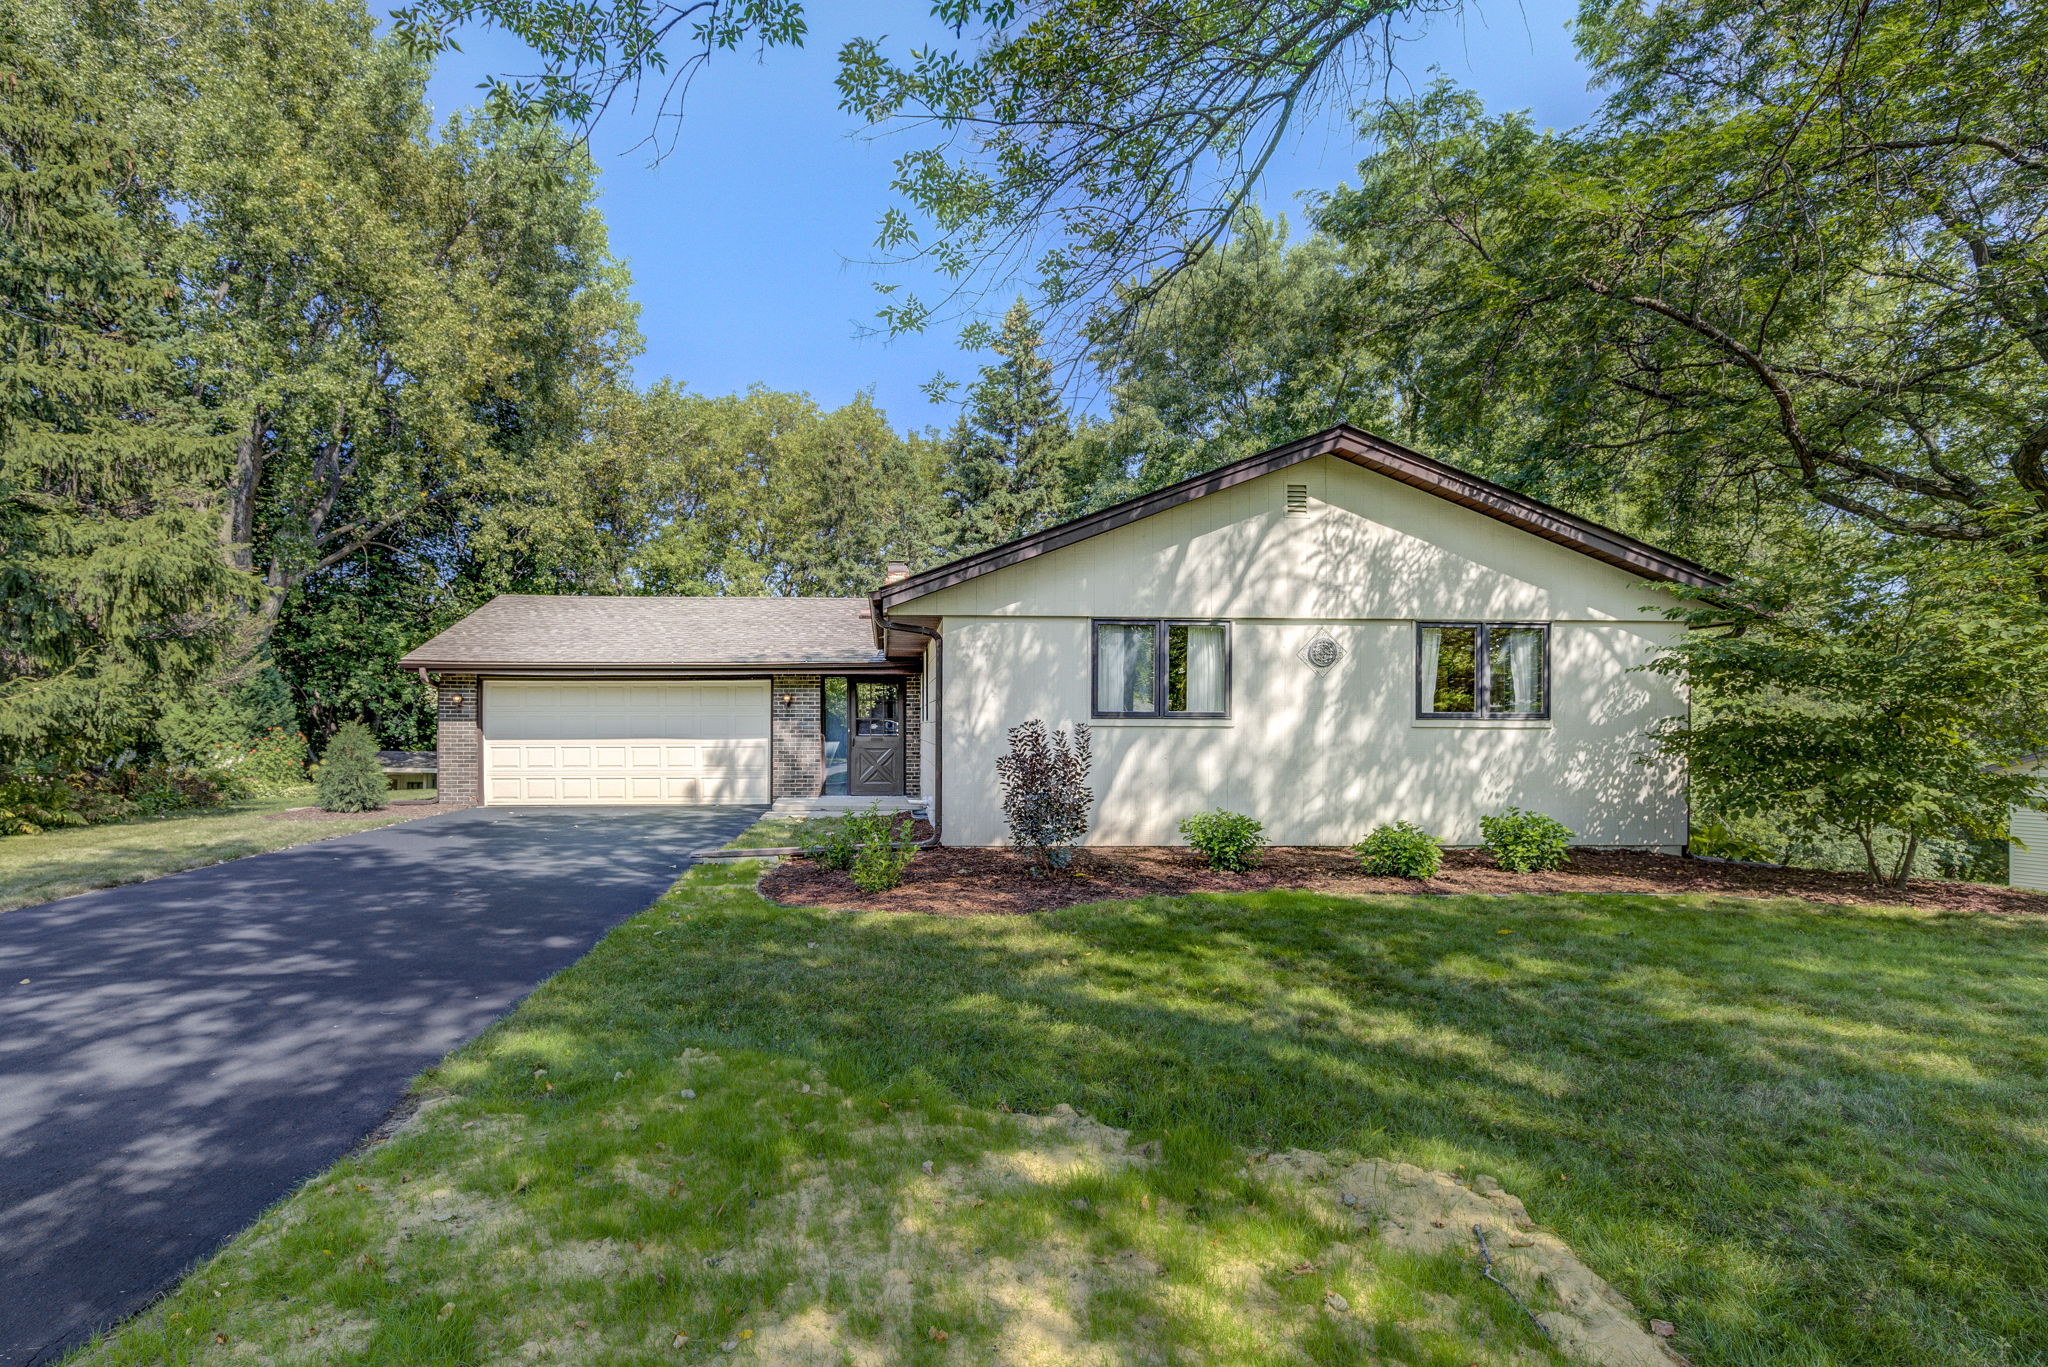  2906 Country Wood Dr, Burnsville, MN 55337, US